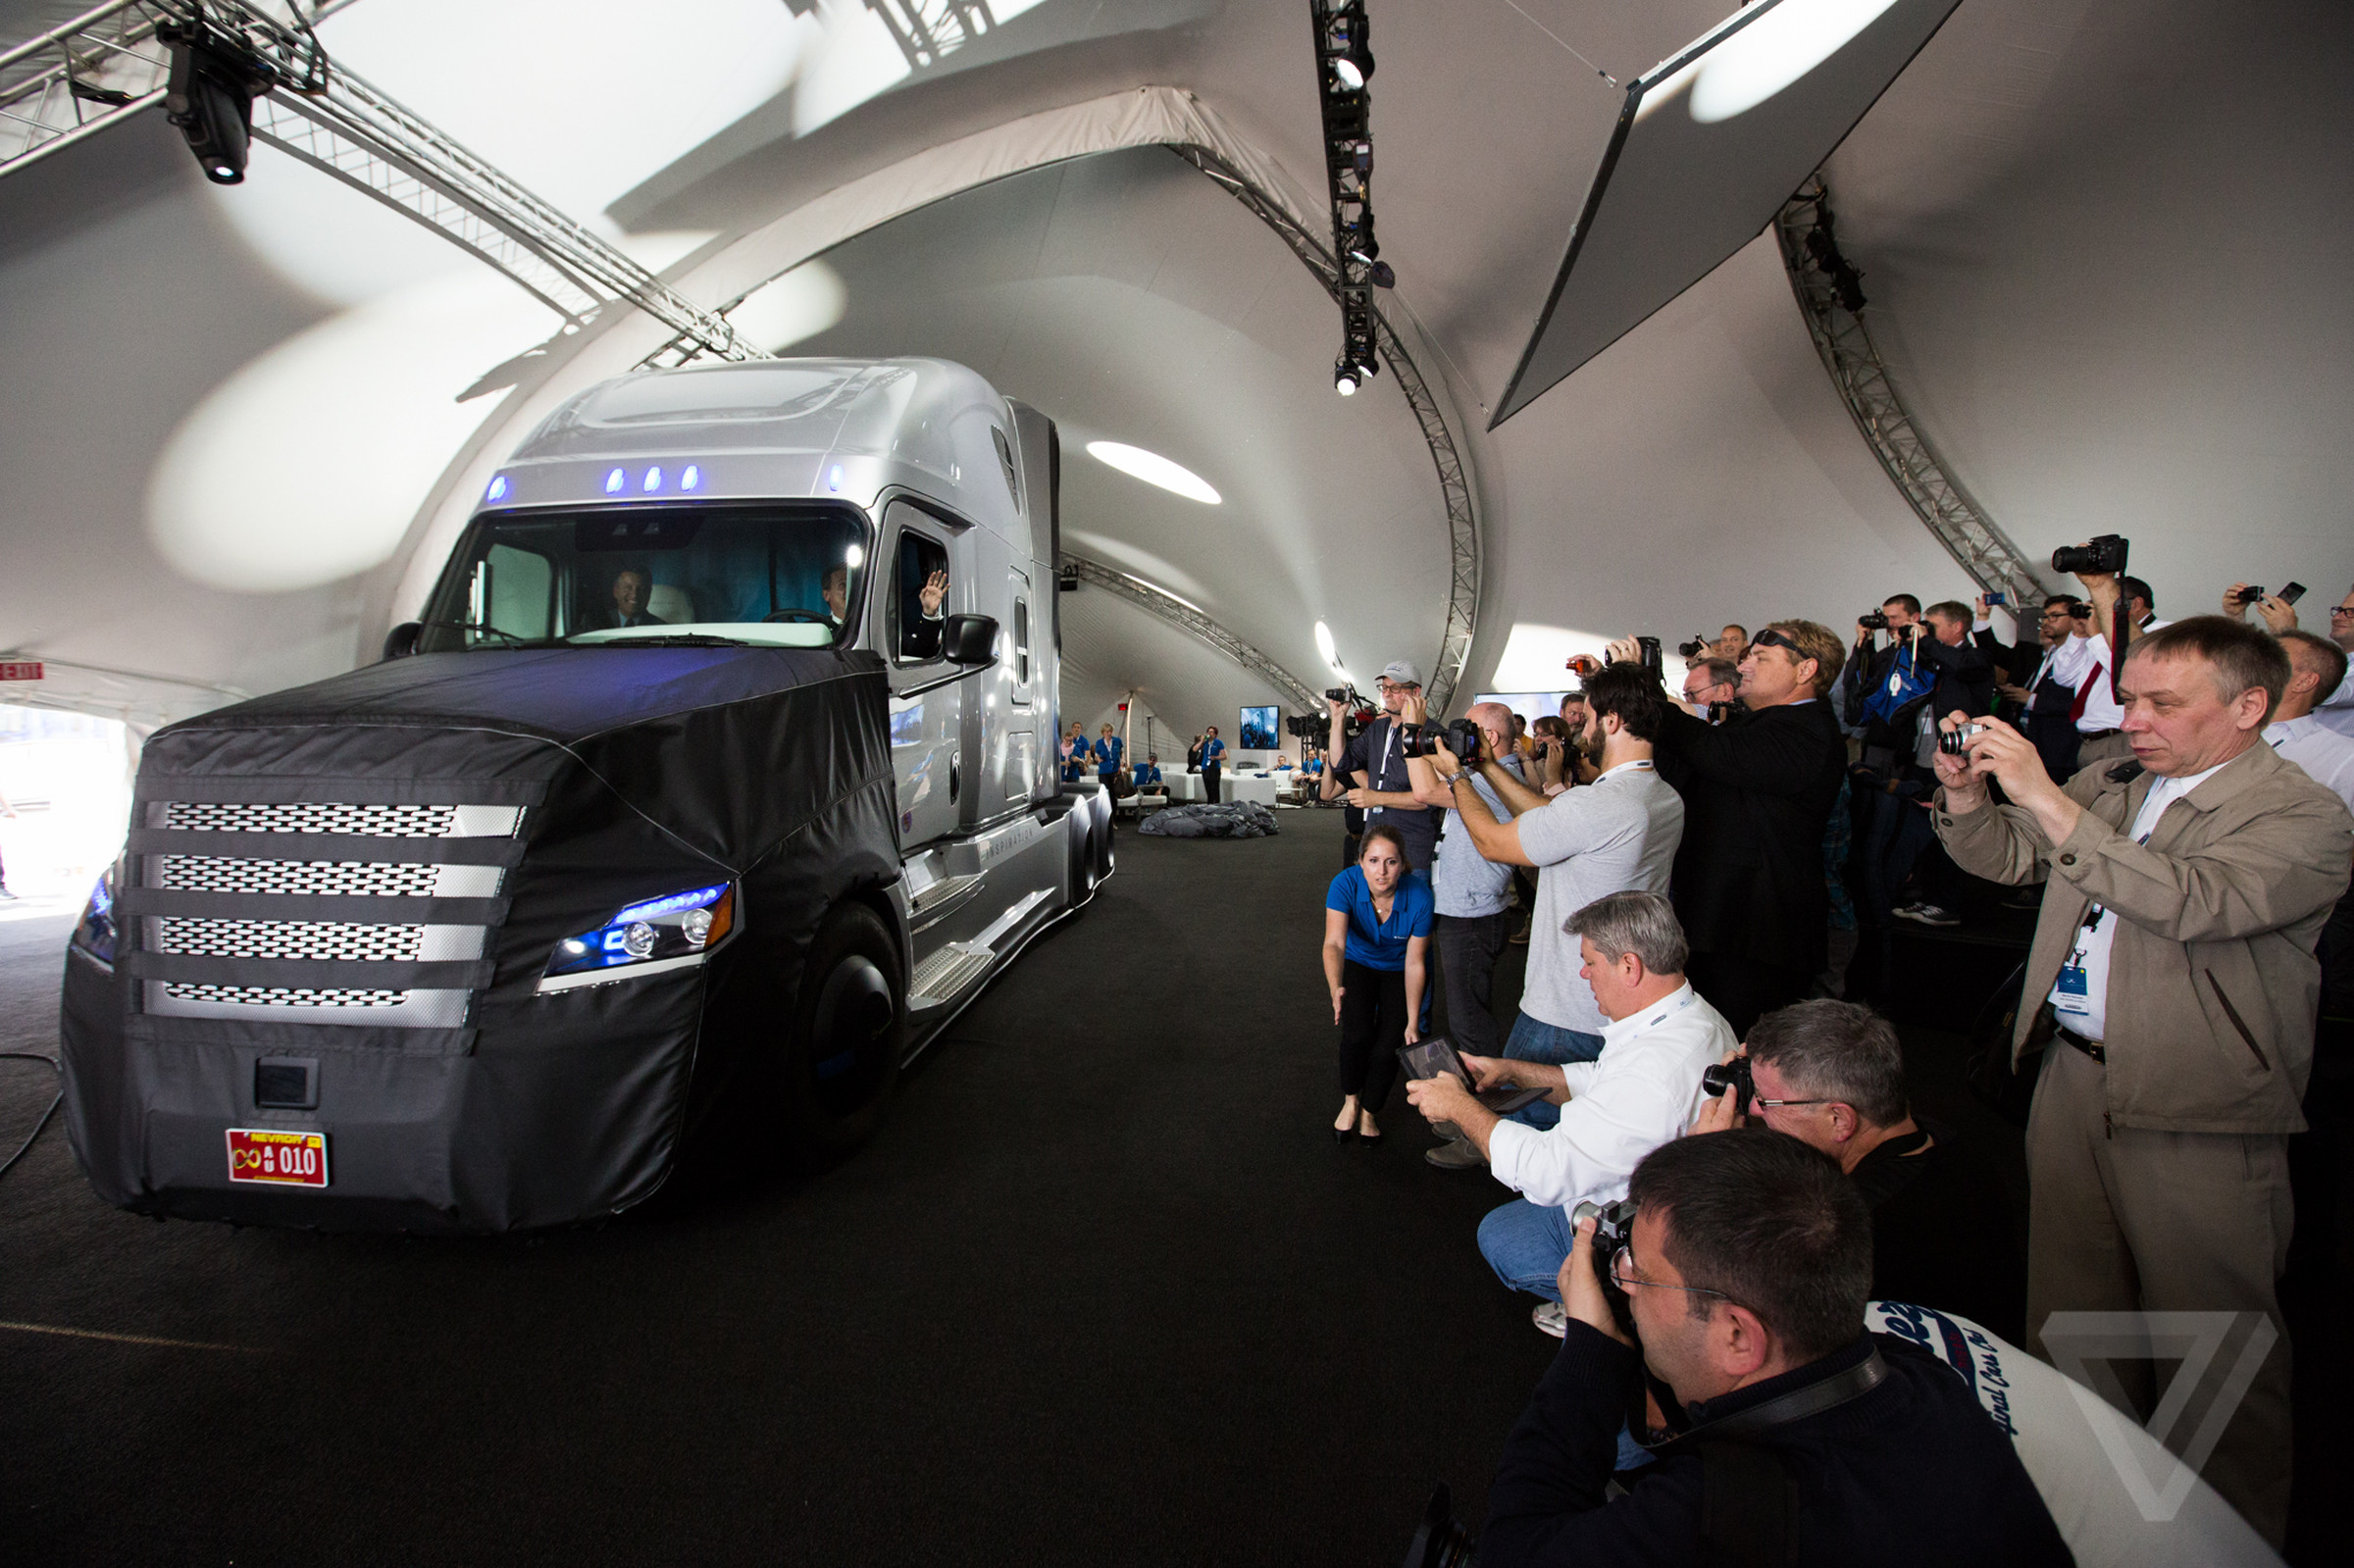 Freightliner self-driving big rig in photos